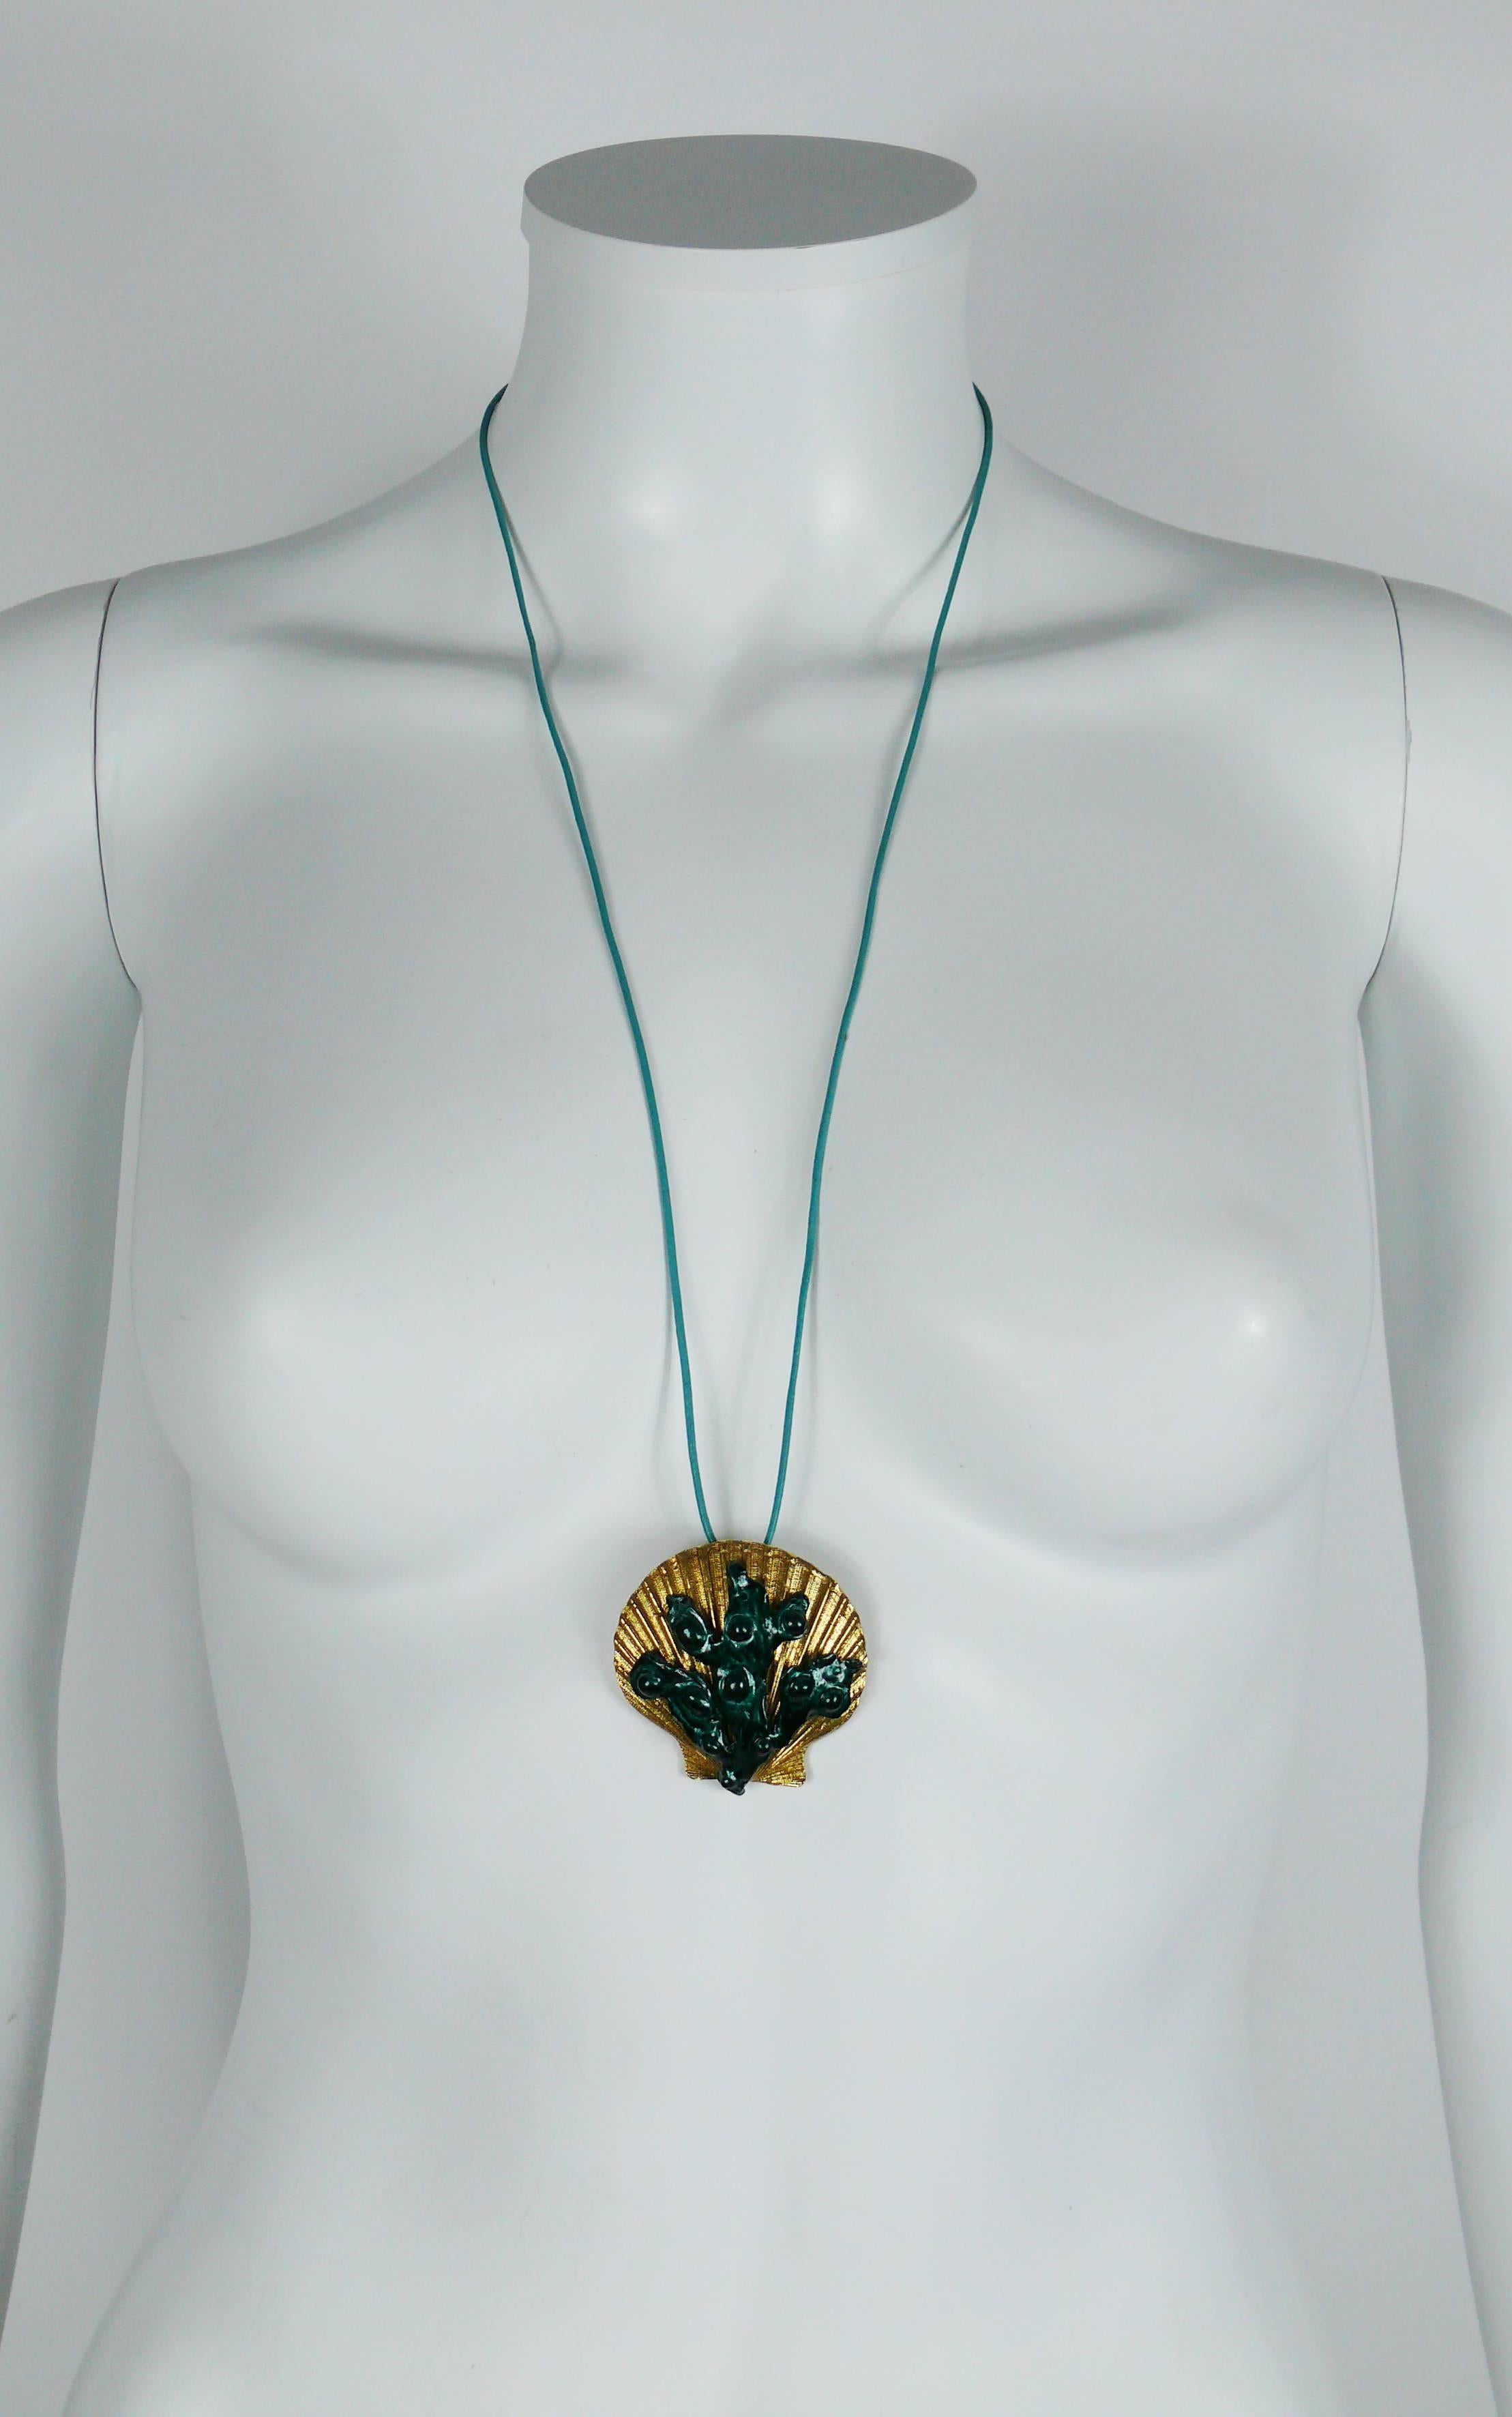 YVES SAINT LAURENT vintage pendant/brooch featuring a gold tone shell embellished with a green enameled seaweed appliqué.

Comes with a lagoon blue color thin leather cord (length worn approx. 29 cm / 11.42 inches).

Can be worn as a brooch or